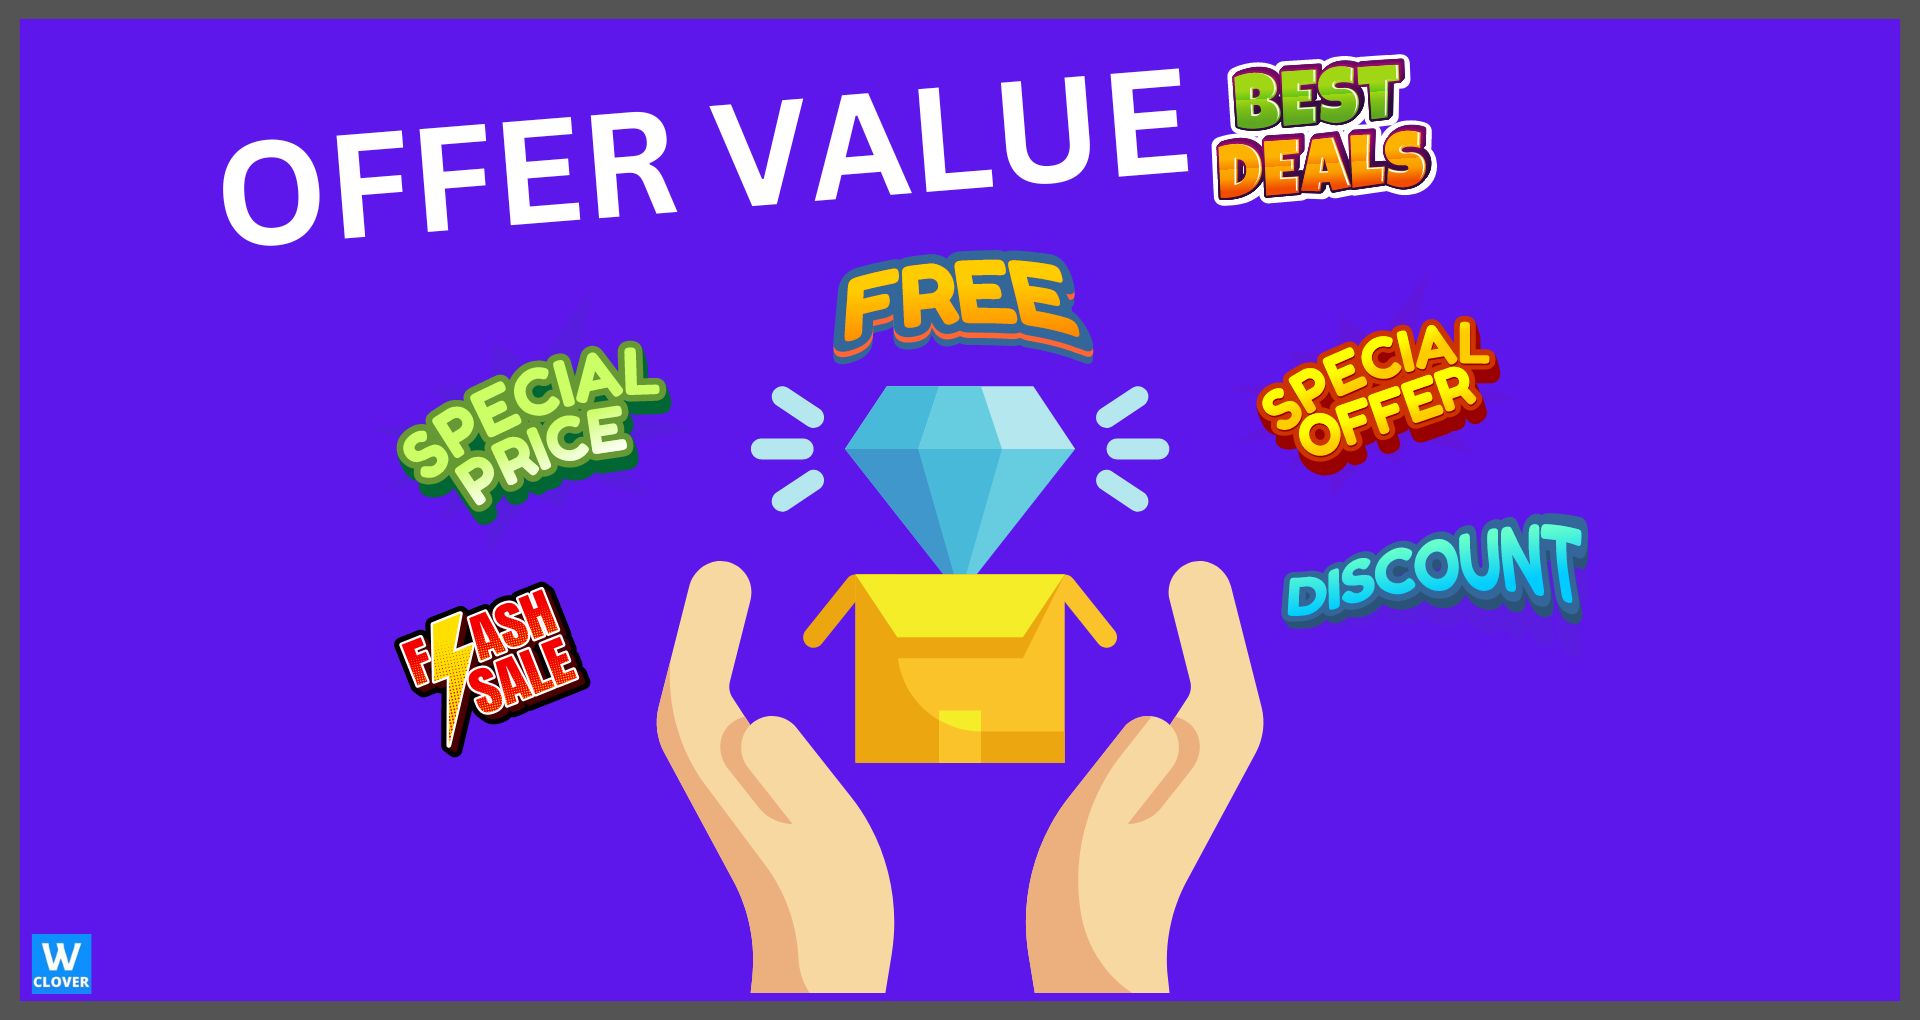 Offer Value info graphics 2 hands holding diamond in box proposed deals and discounts on a purple background